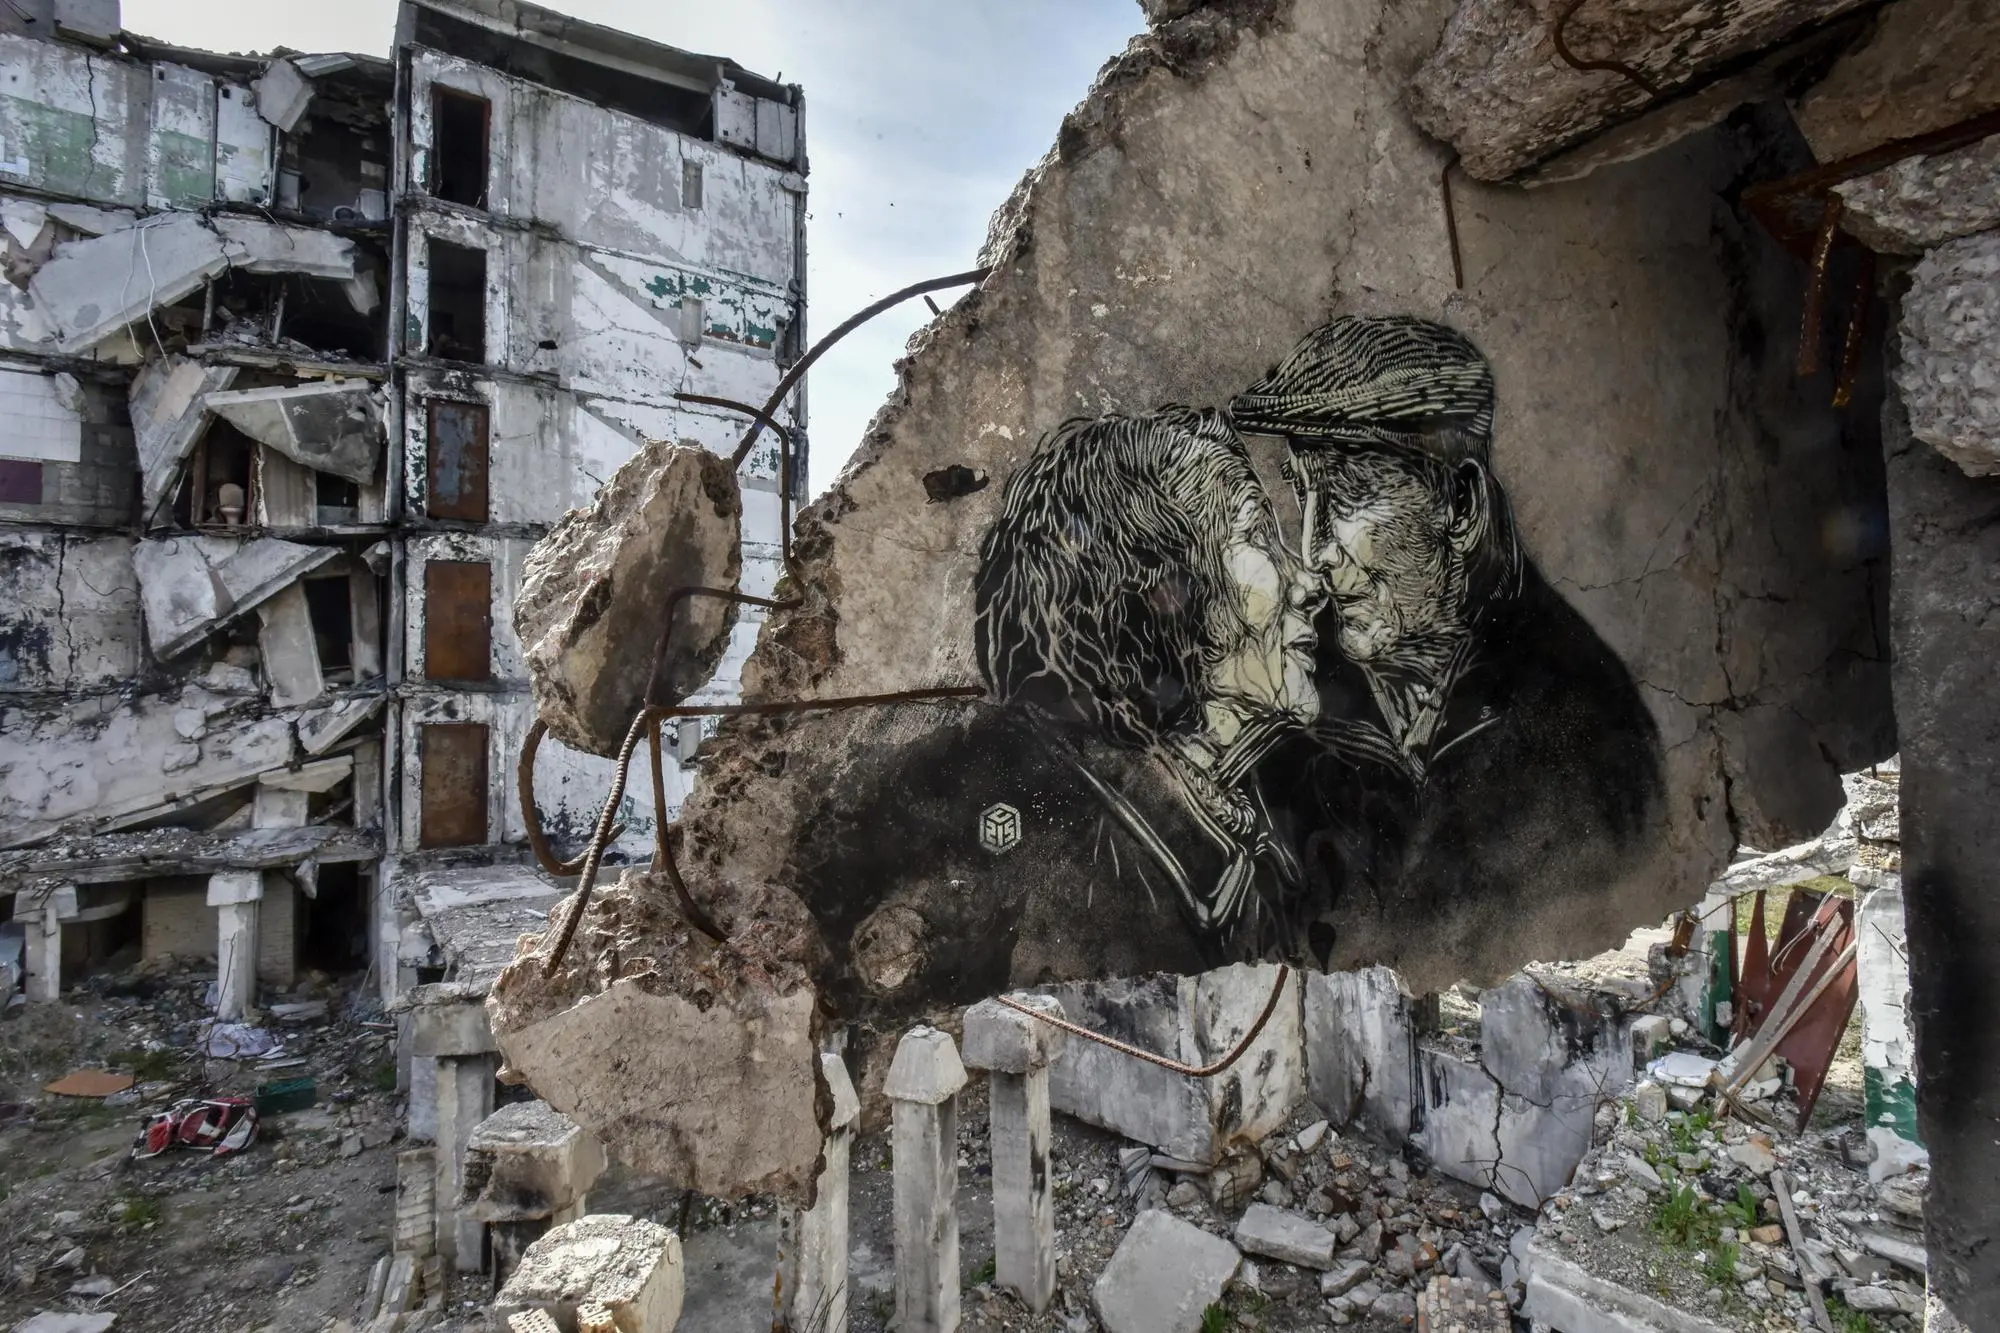 epa10604618 A portrait of an elderly couple, made by street artist Christian Guemy, known as C215, on the wall of a house destroyed by Russian shelling in 2022, in Borodyanka, Kyiv region, Ukraine, 02 May 2023, amid Russia's invasion. Russian troops entered Ukrainian territory in February 2022, starting a conflict that has provoked destruction and a humanitarian crisis. EPA/OLEG PETRASYUK